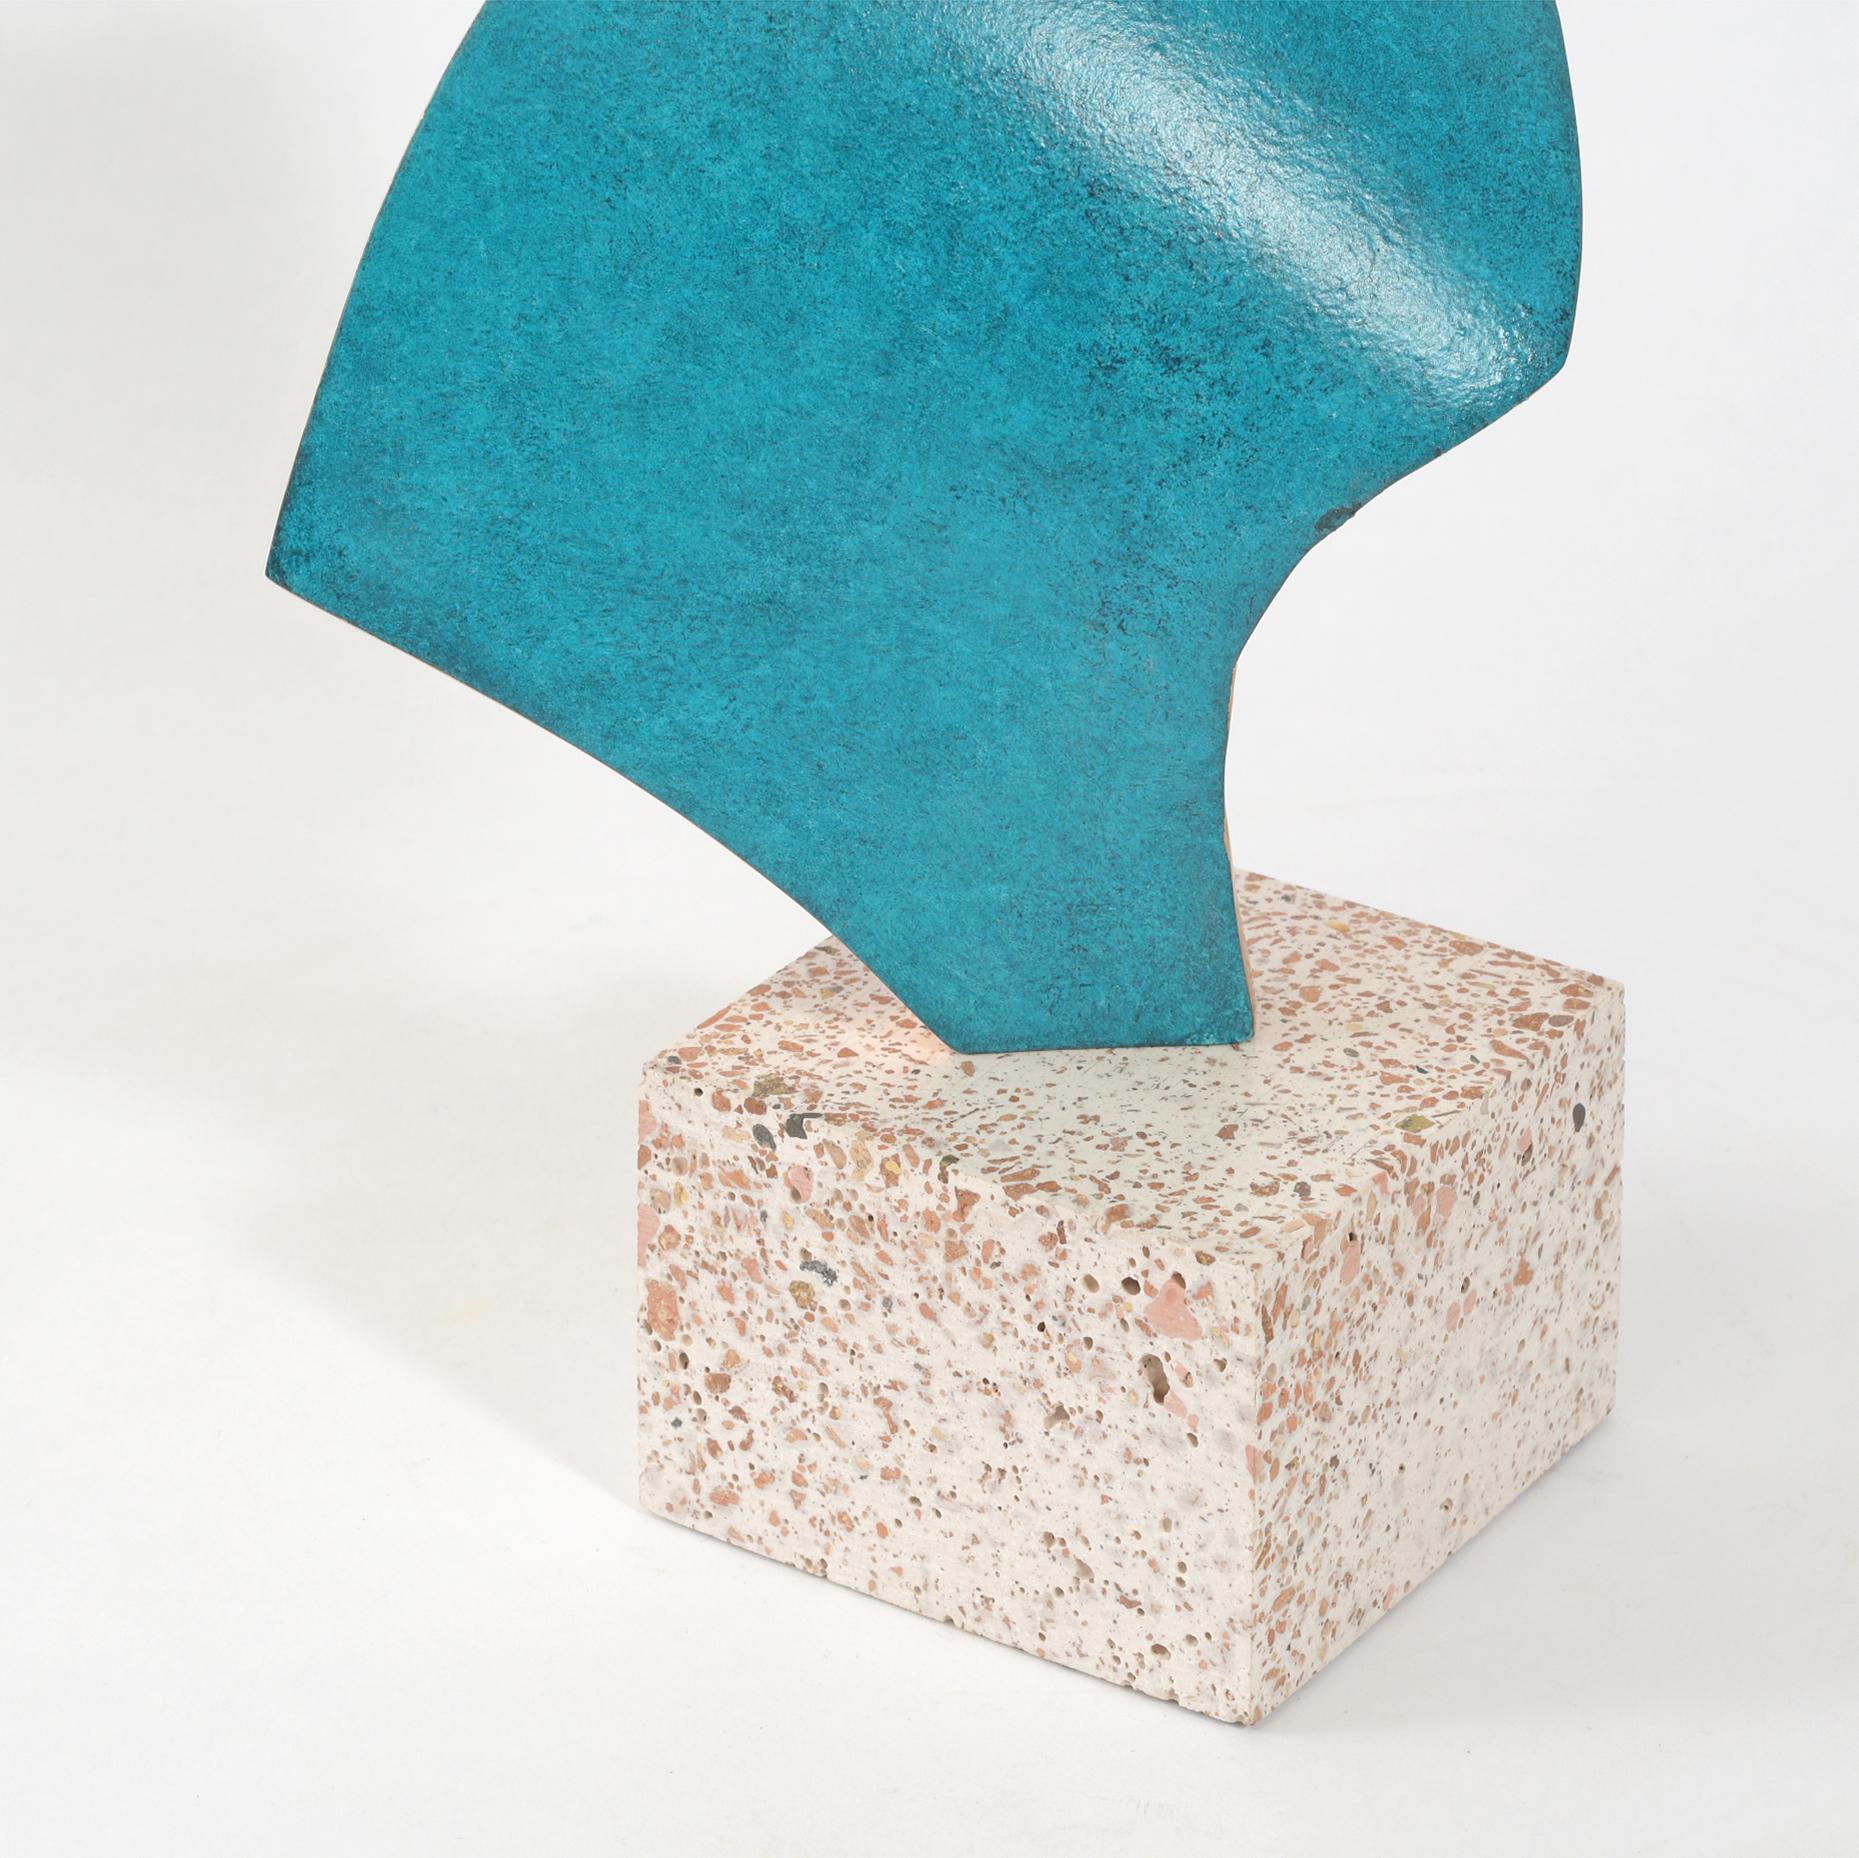 British Contemporary Sculpture by Philip Hearsey - Fragment II For Sale 5